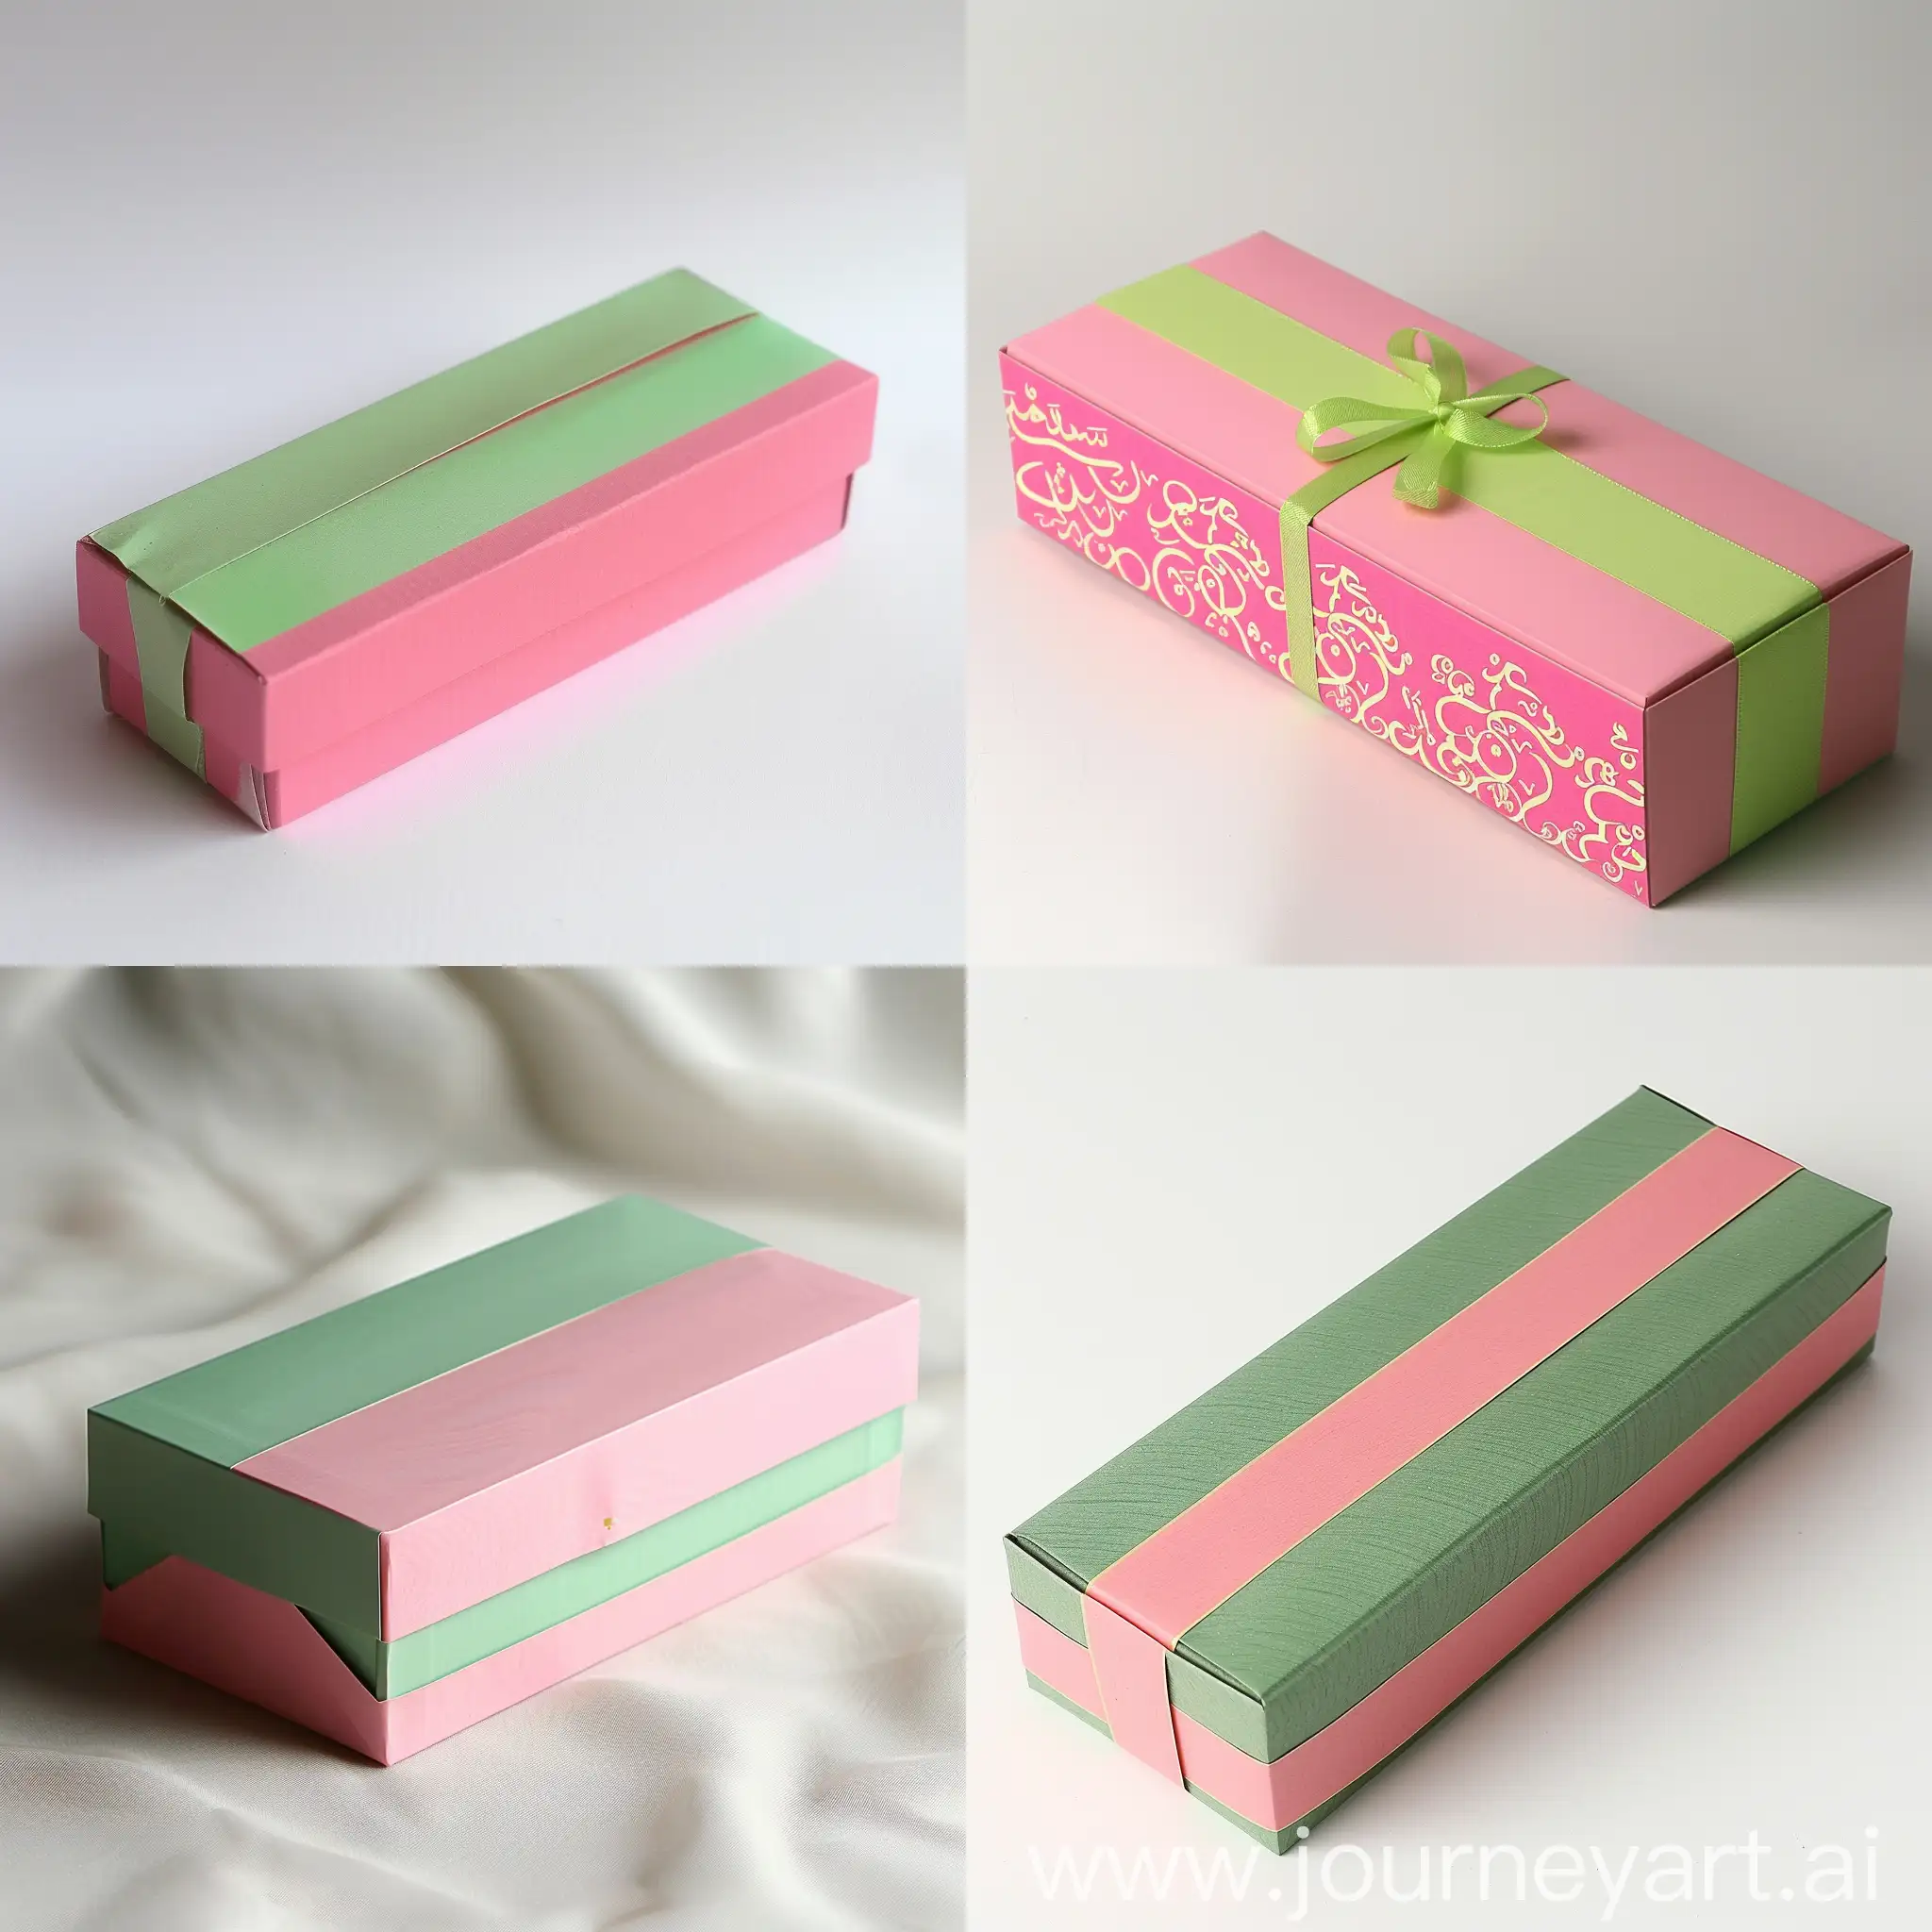 long rectangle box ,wide, not tall, pink and green colors design for eid simple and no top cover